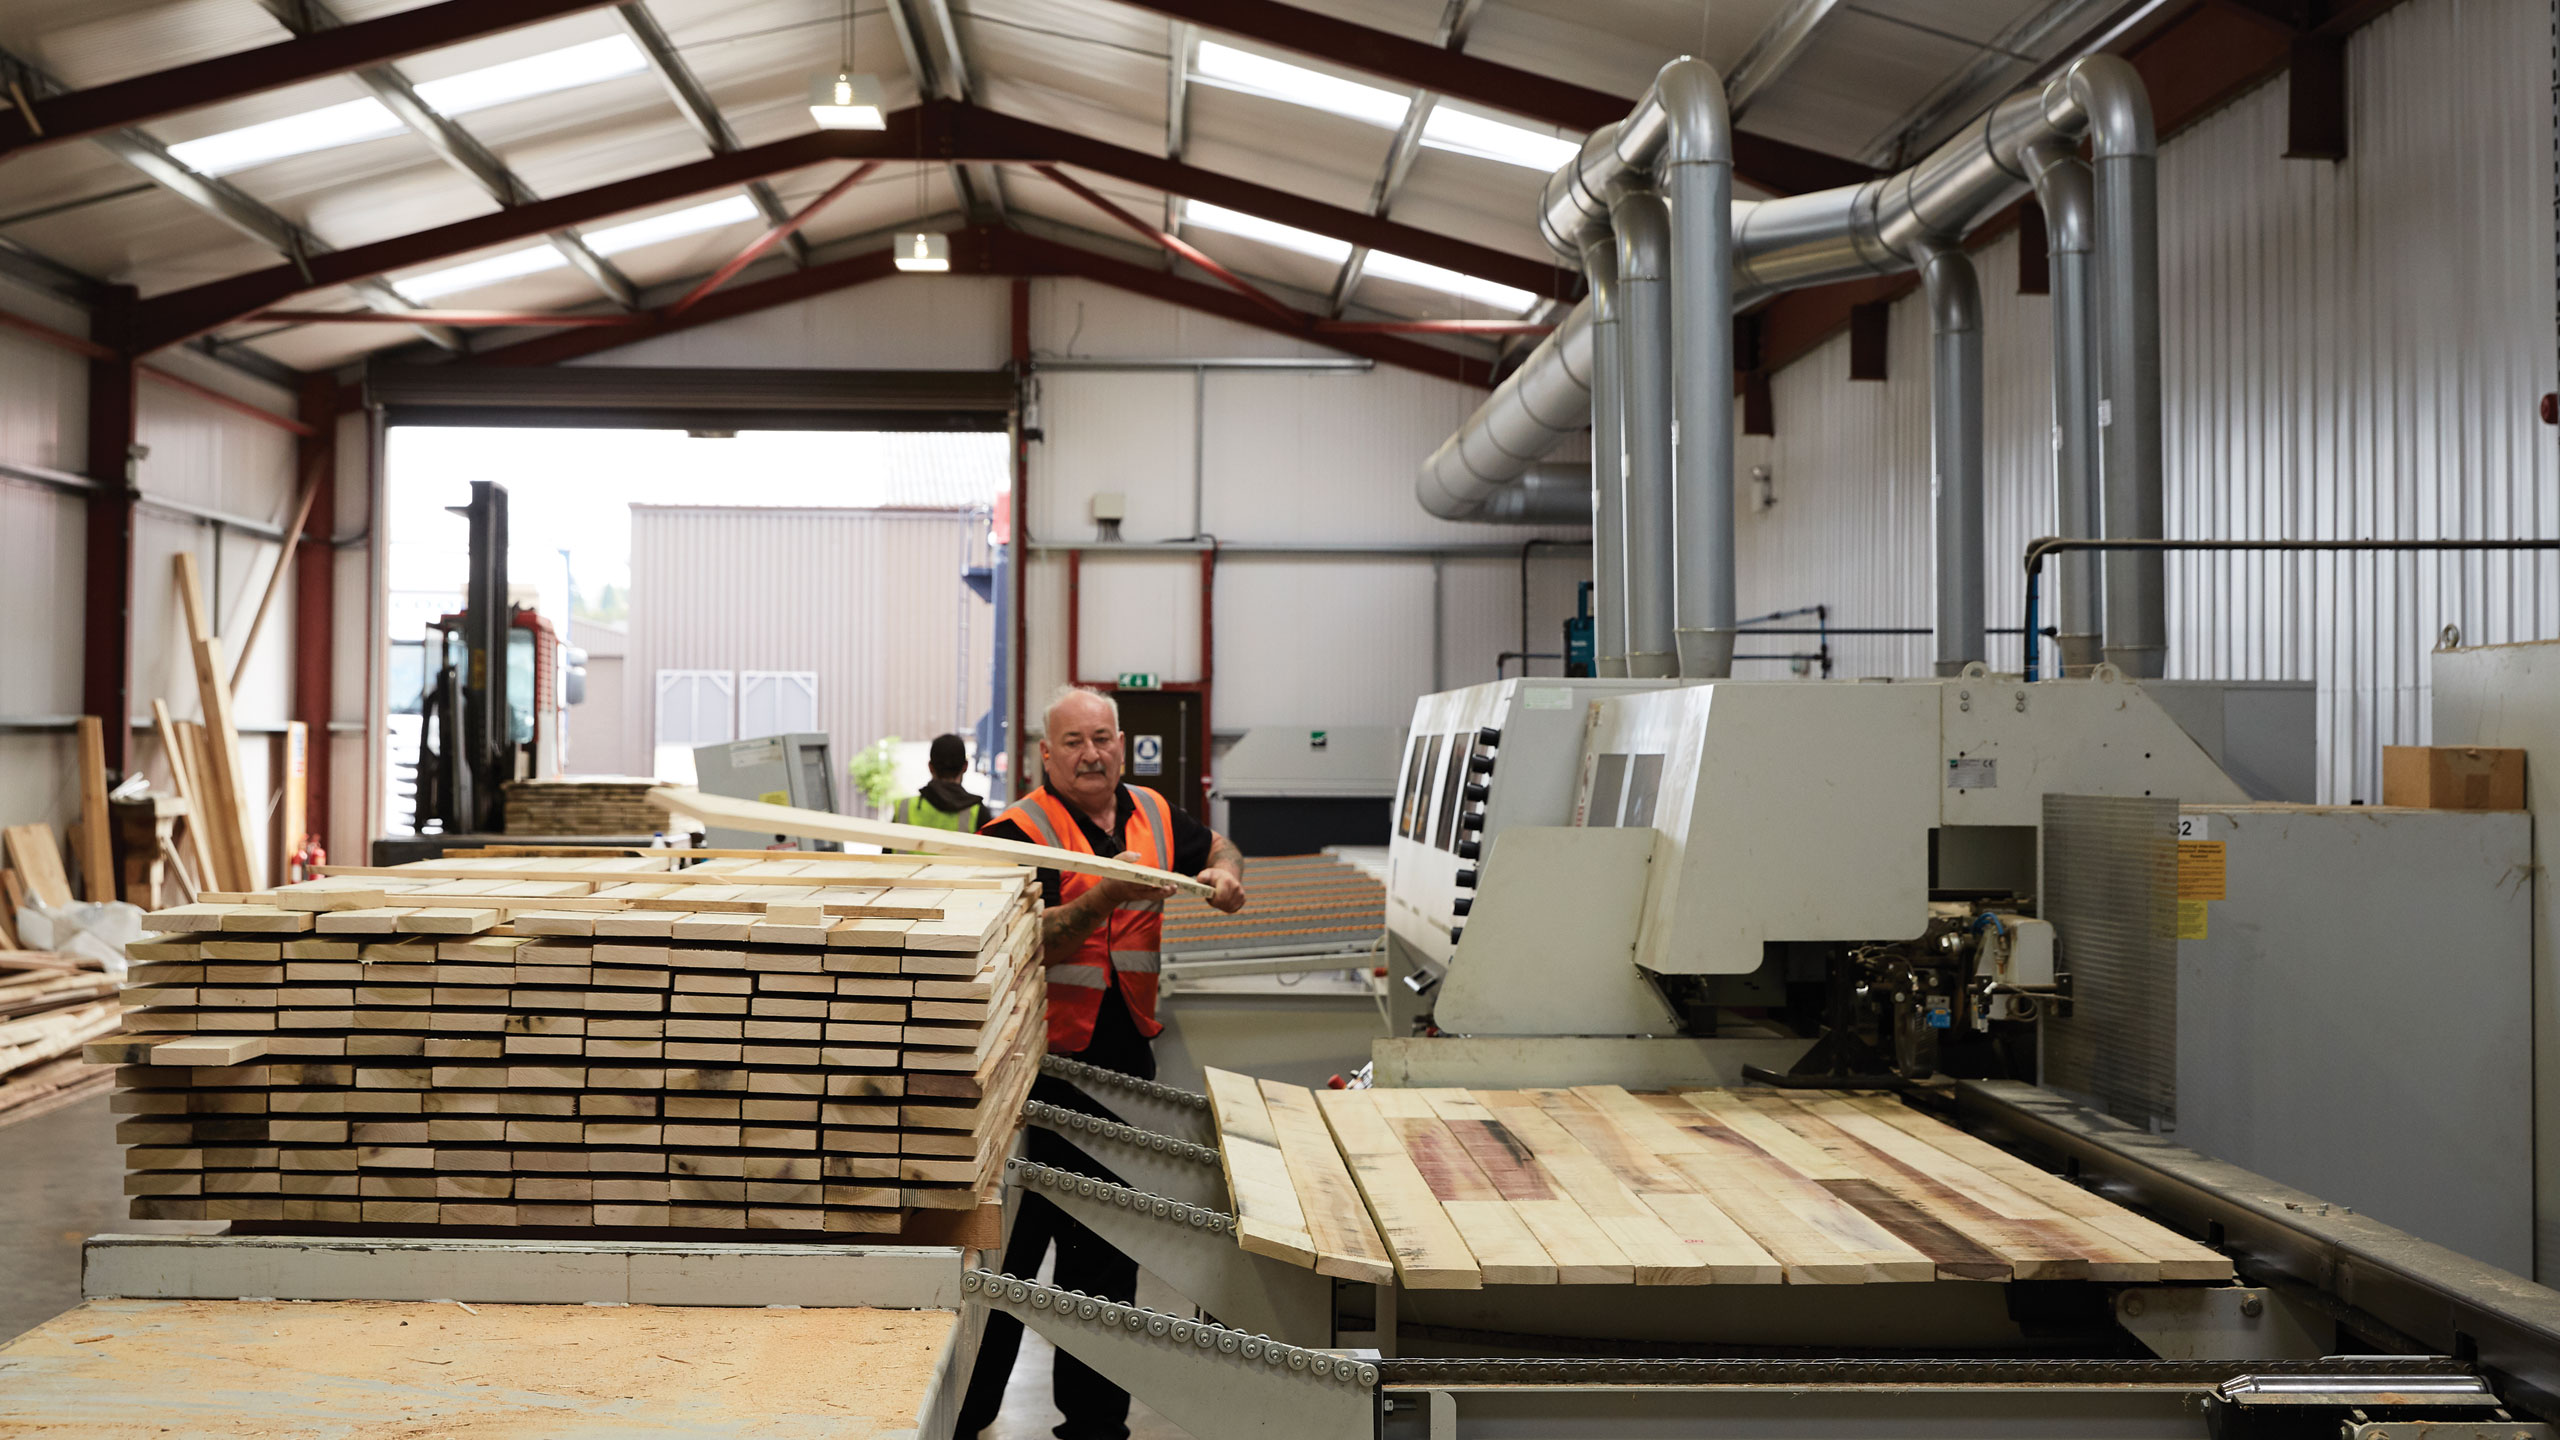 Glenalmond timber graded, cut, finger-jointed and planed all of the tulipwood in MultiPly.